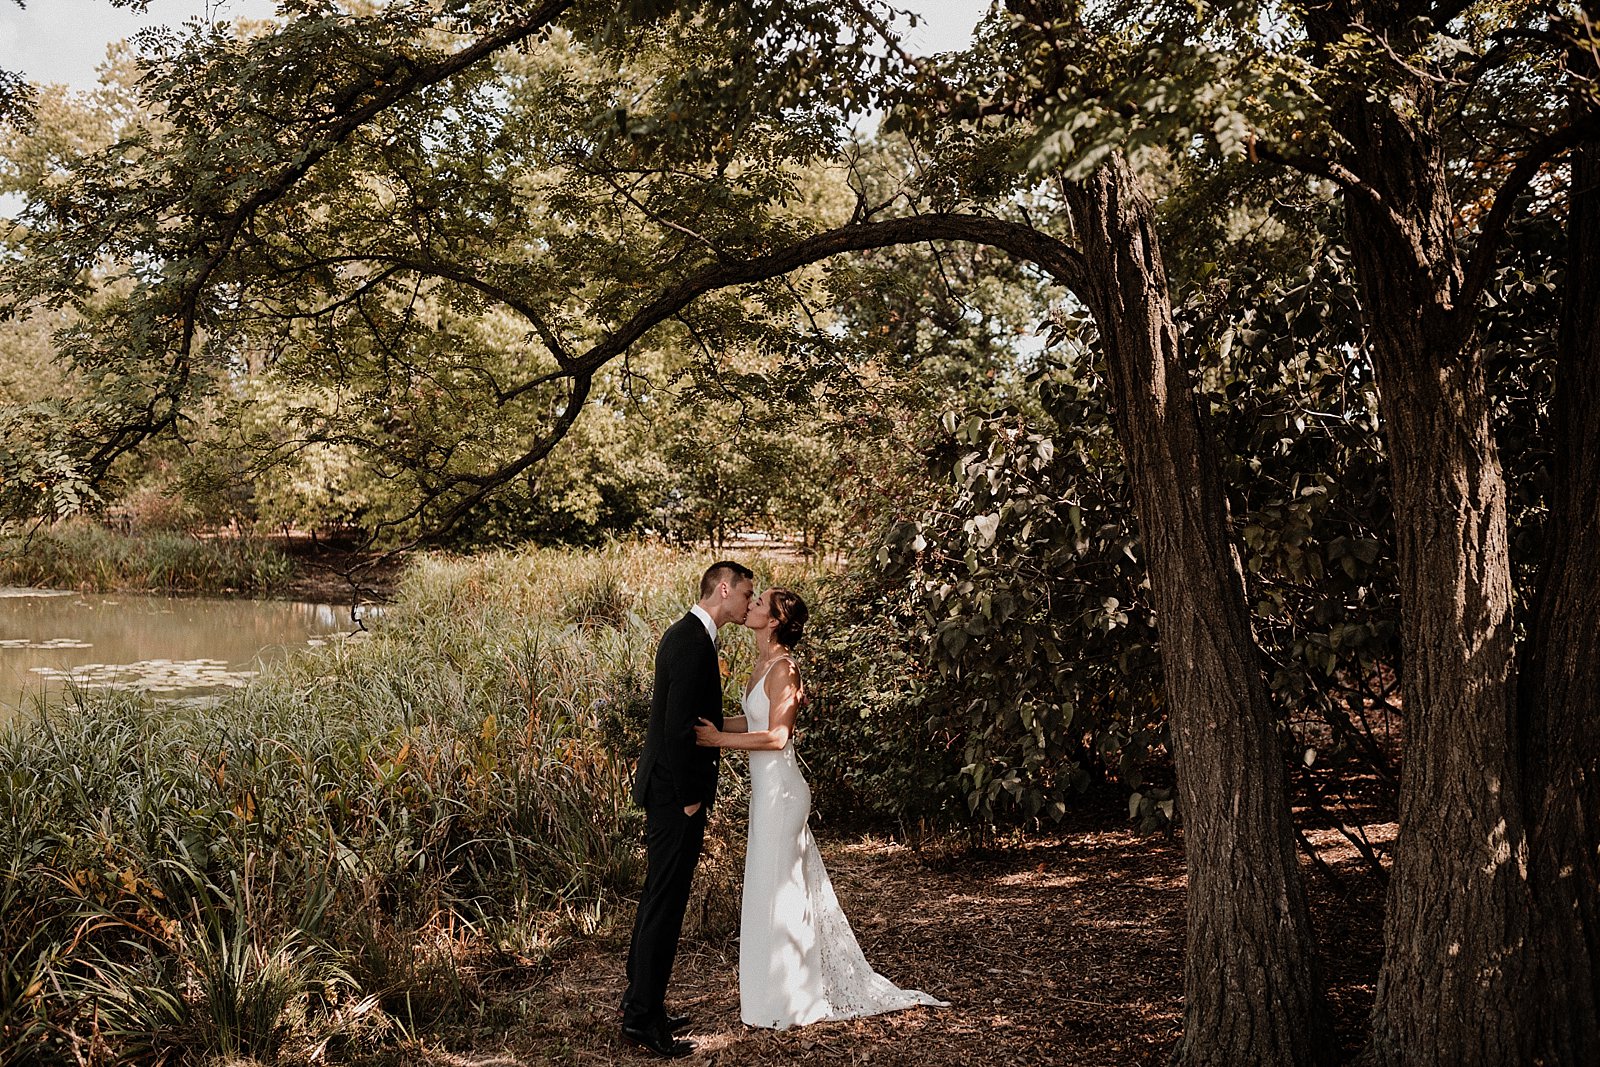 wes + gus | Wyn Wiley Photography_1348